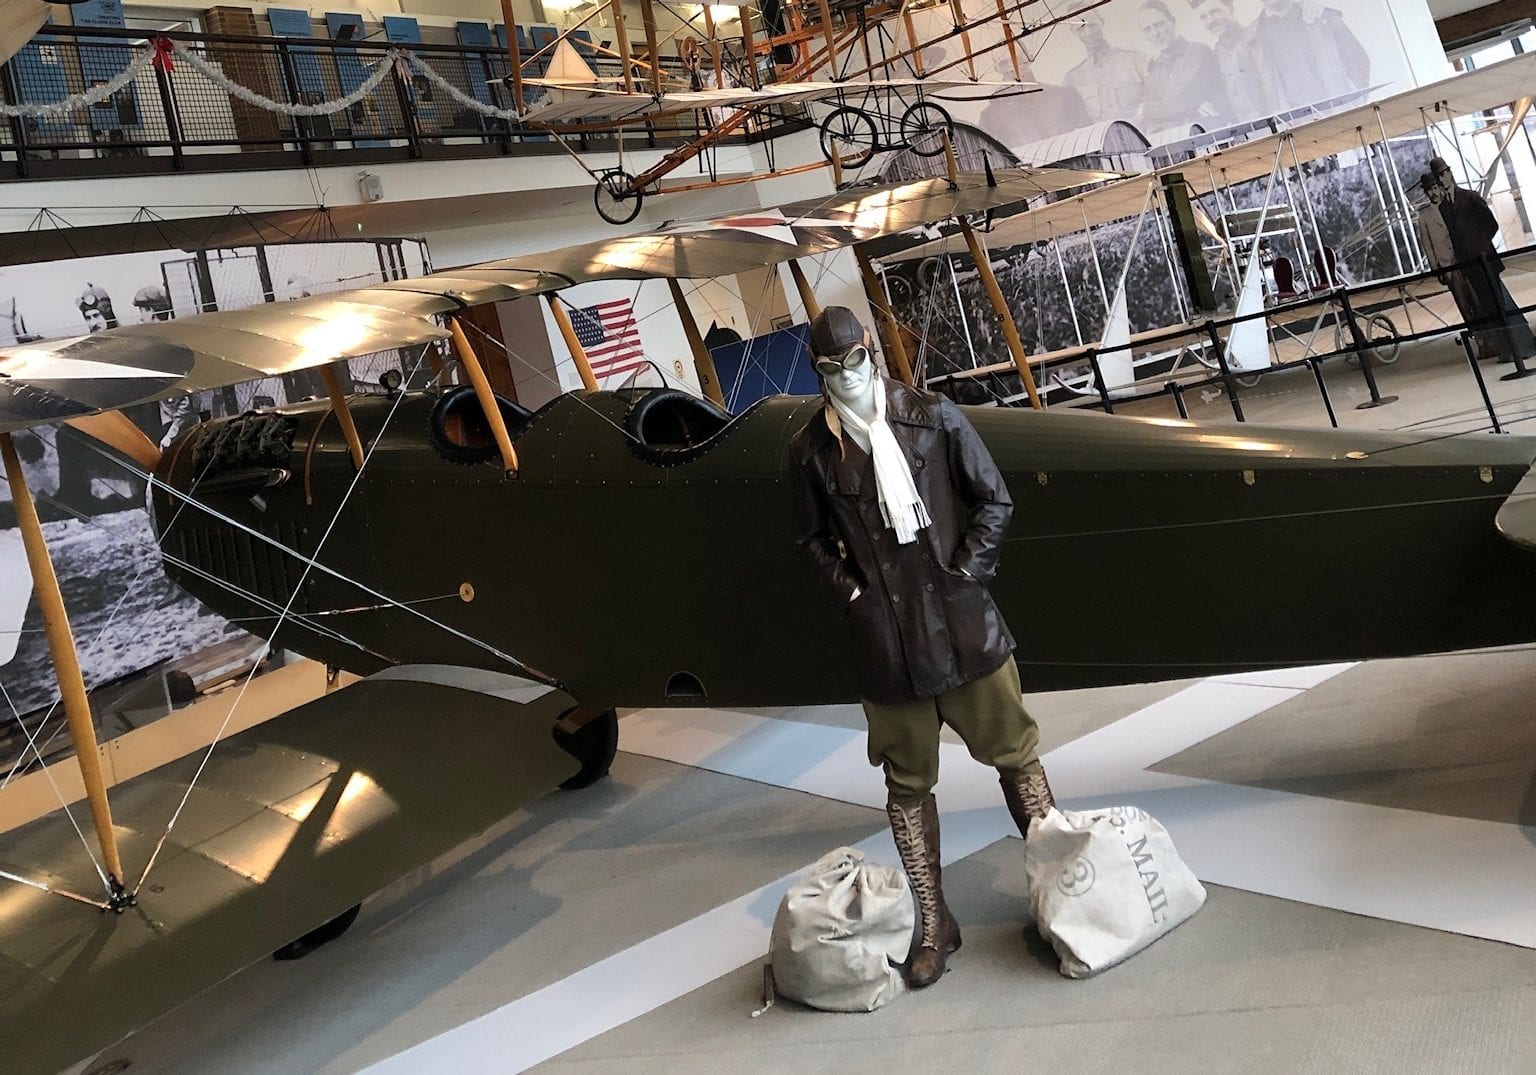 The Stories We Tell: College Park Aviation Museum’s “Delivering America: Airmail to Email”